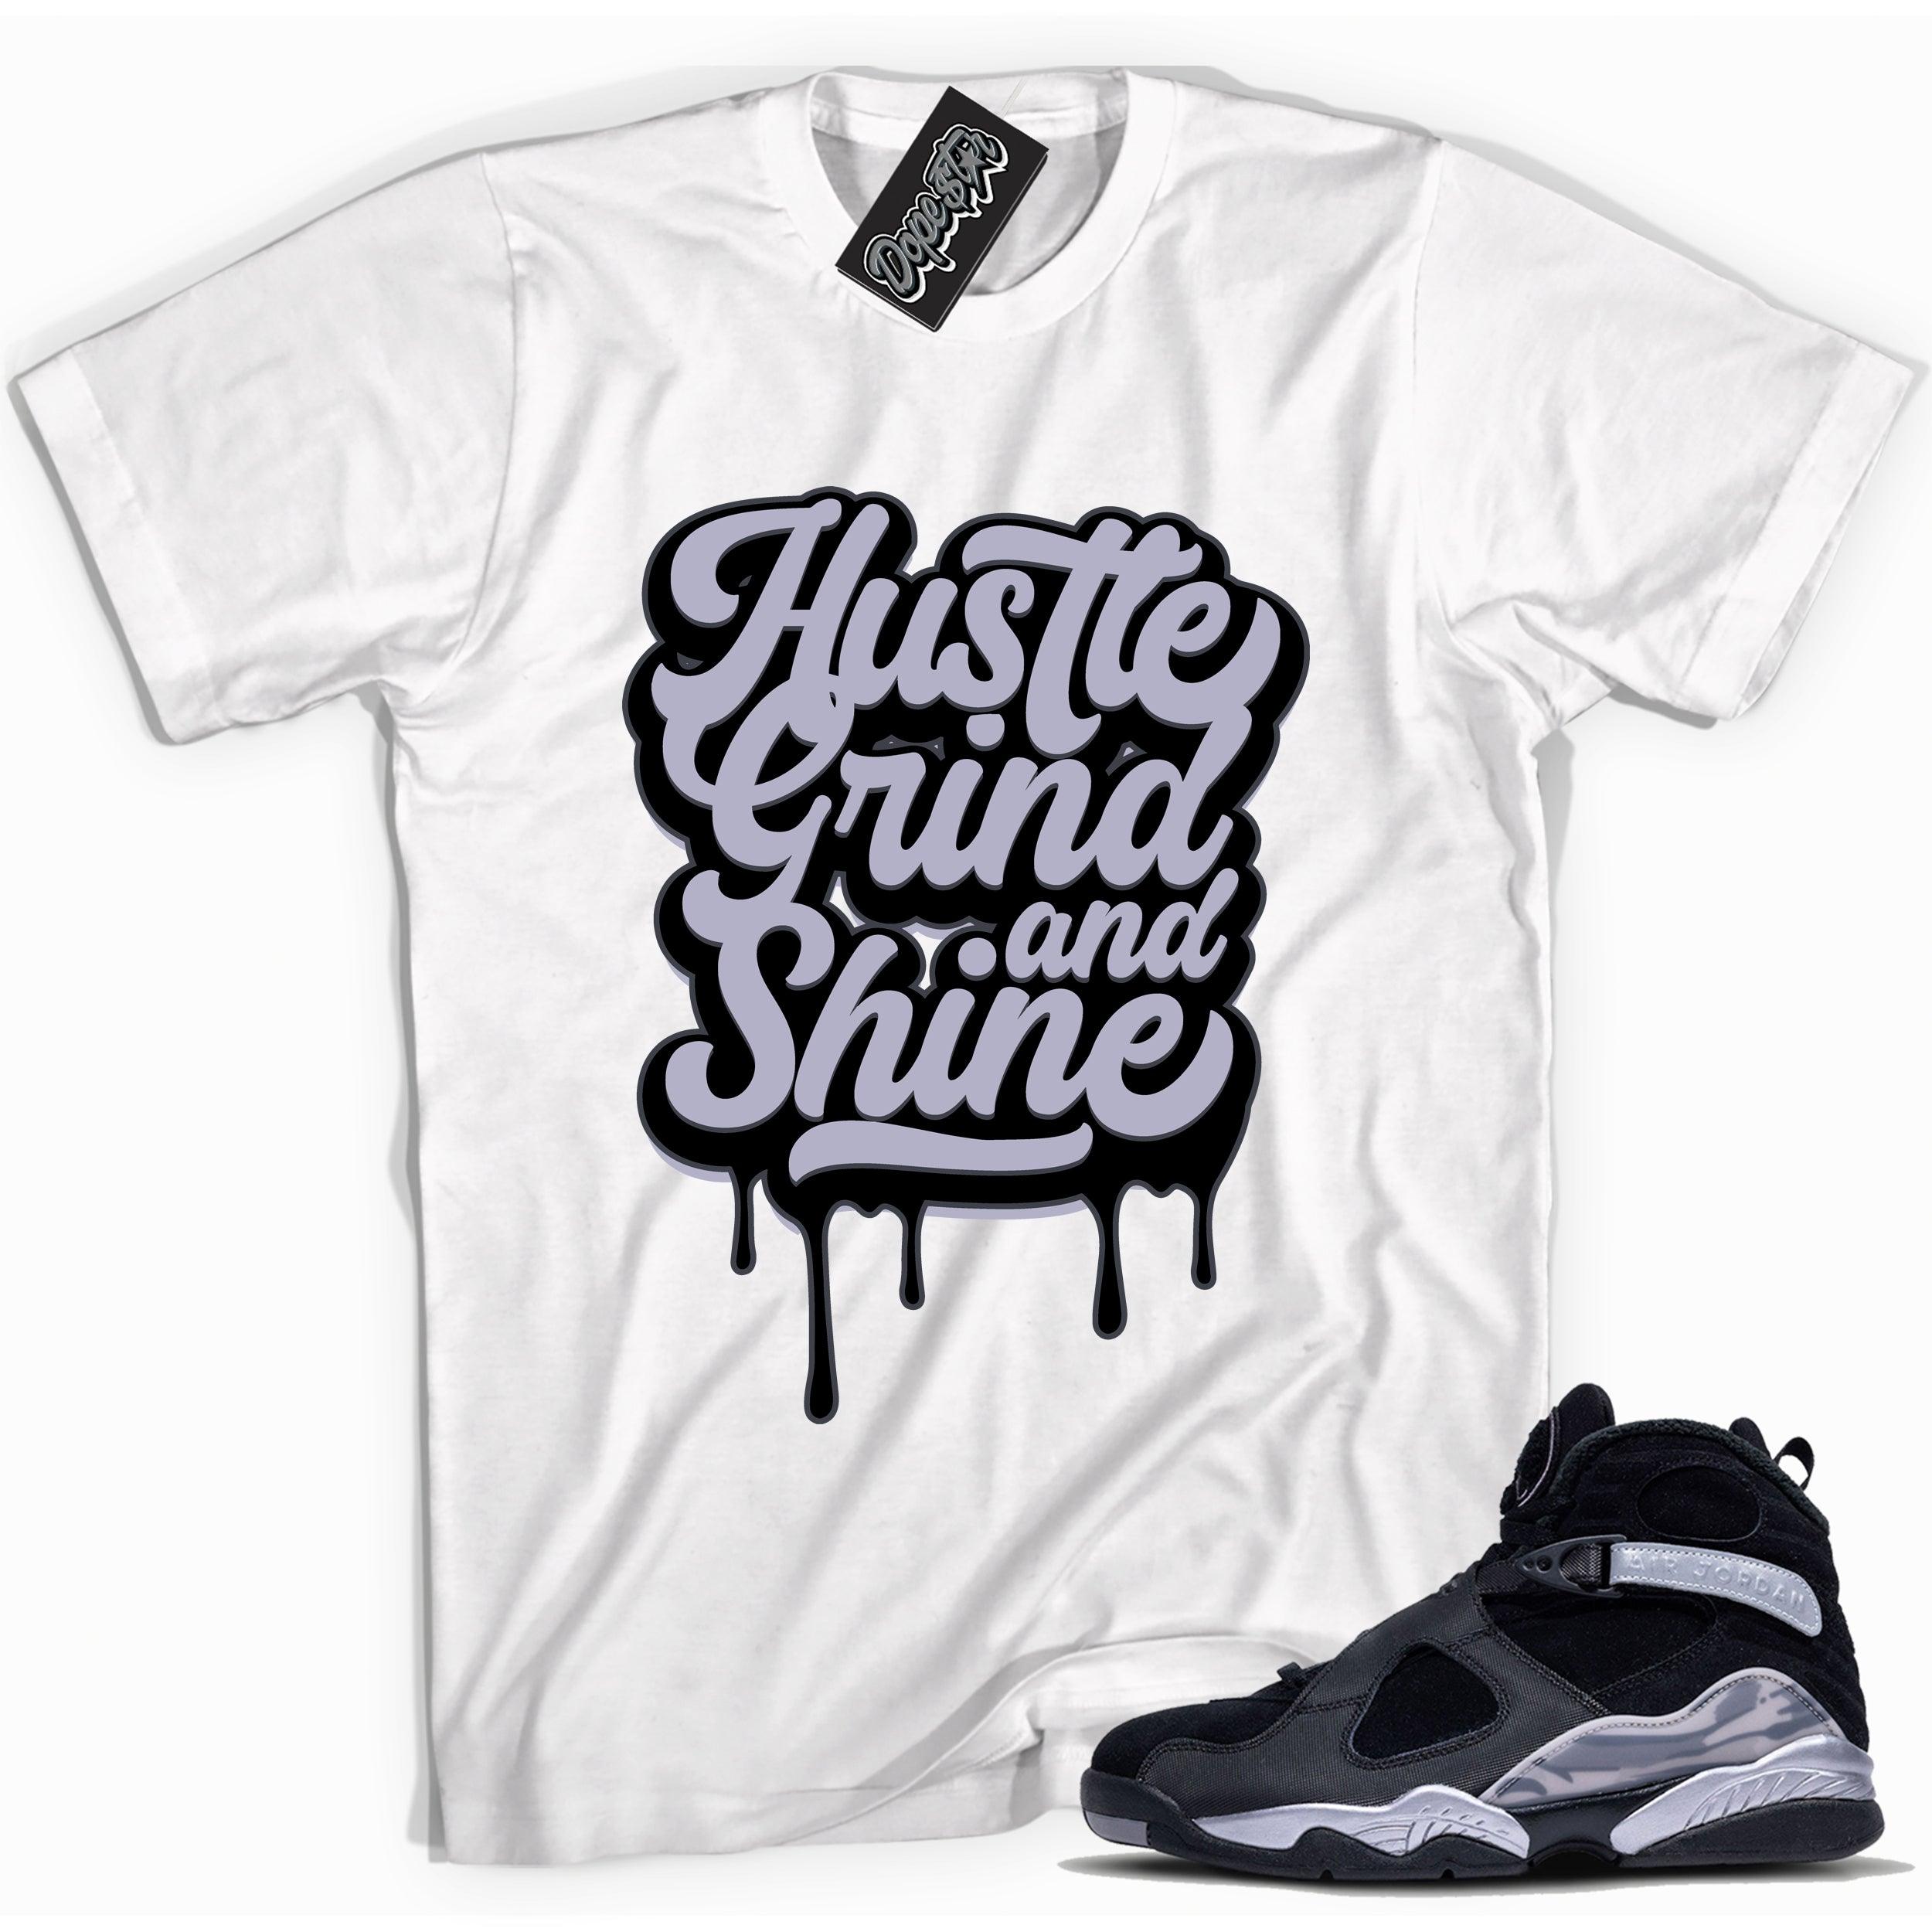 Cool White graphic tee with “ Hustle Grind and Shine ” print, that perfectly matches Air Jordan 8 Winterized sneakers 